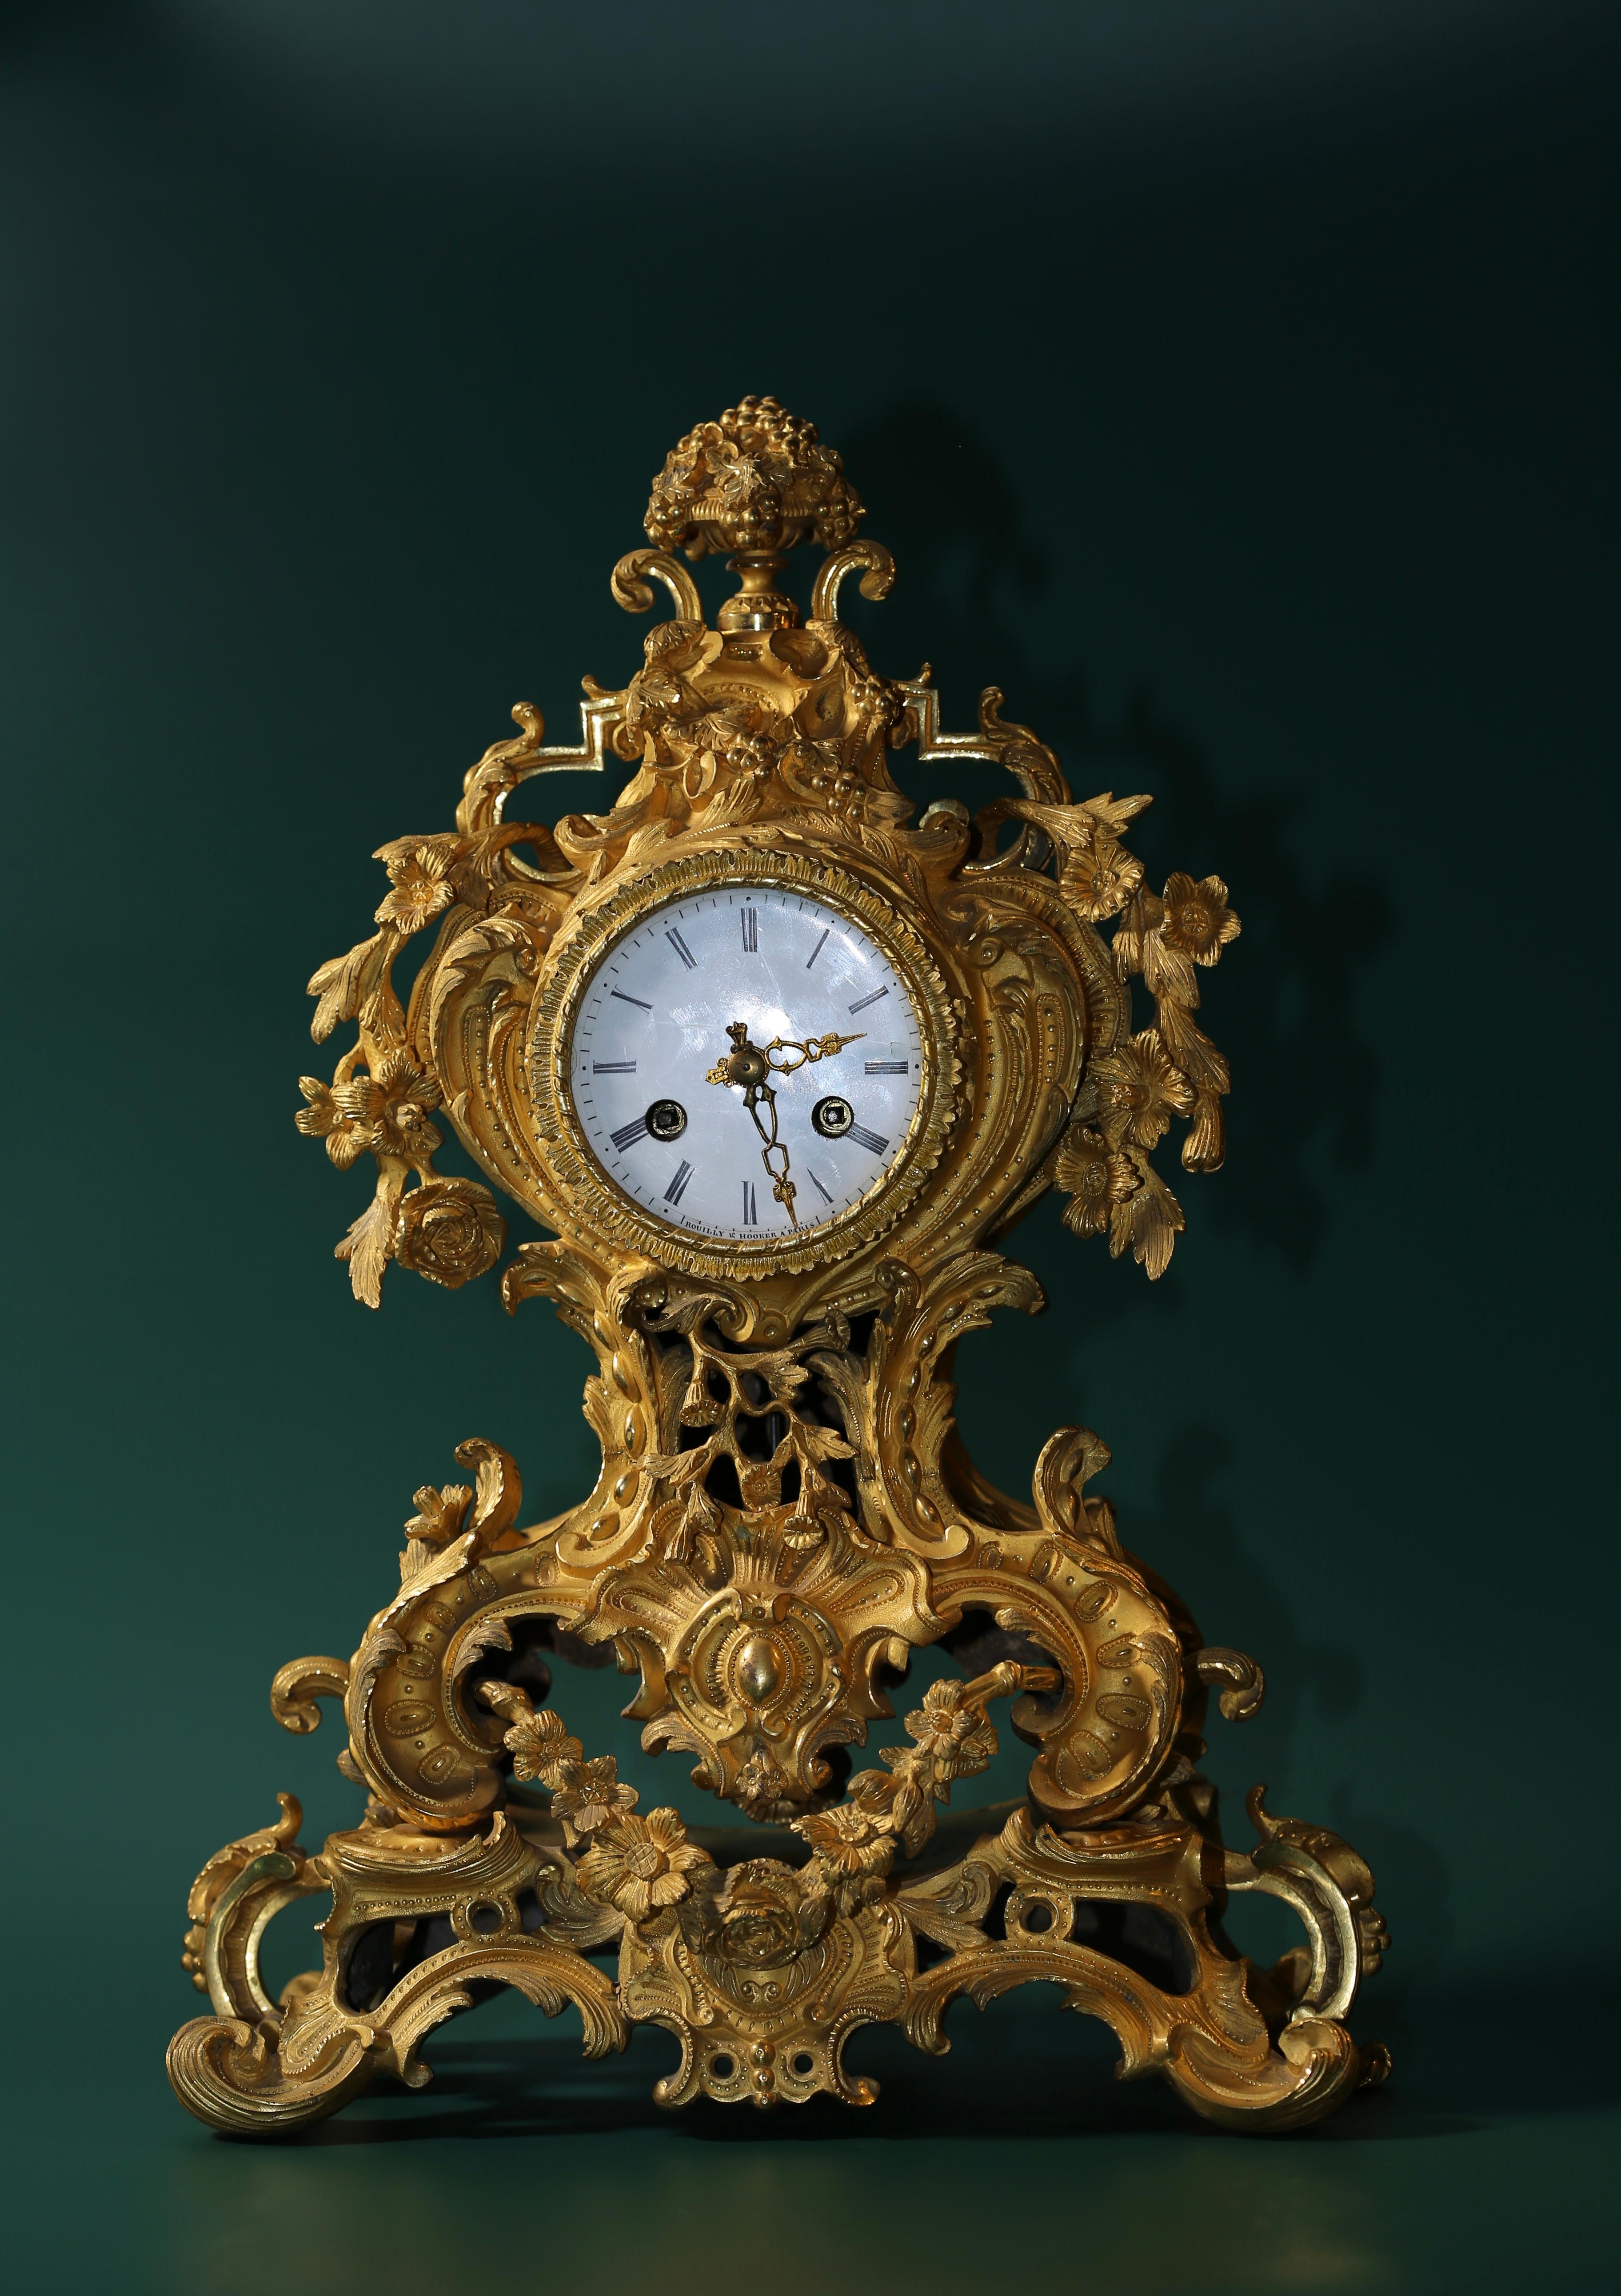 Measures: 3 4/5 inch/ 350mm High

Made in France, Mid 19th century, Gilt Bronze Rococo style standing clock in perfect condition, functions well

This magnificent 19th century masterpiece was proudly obtained by Redstone Antiques in 2011 from a